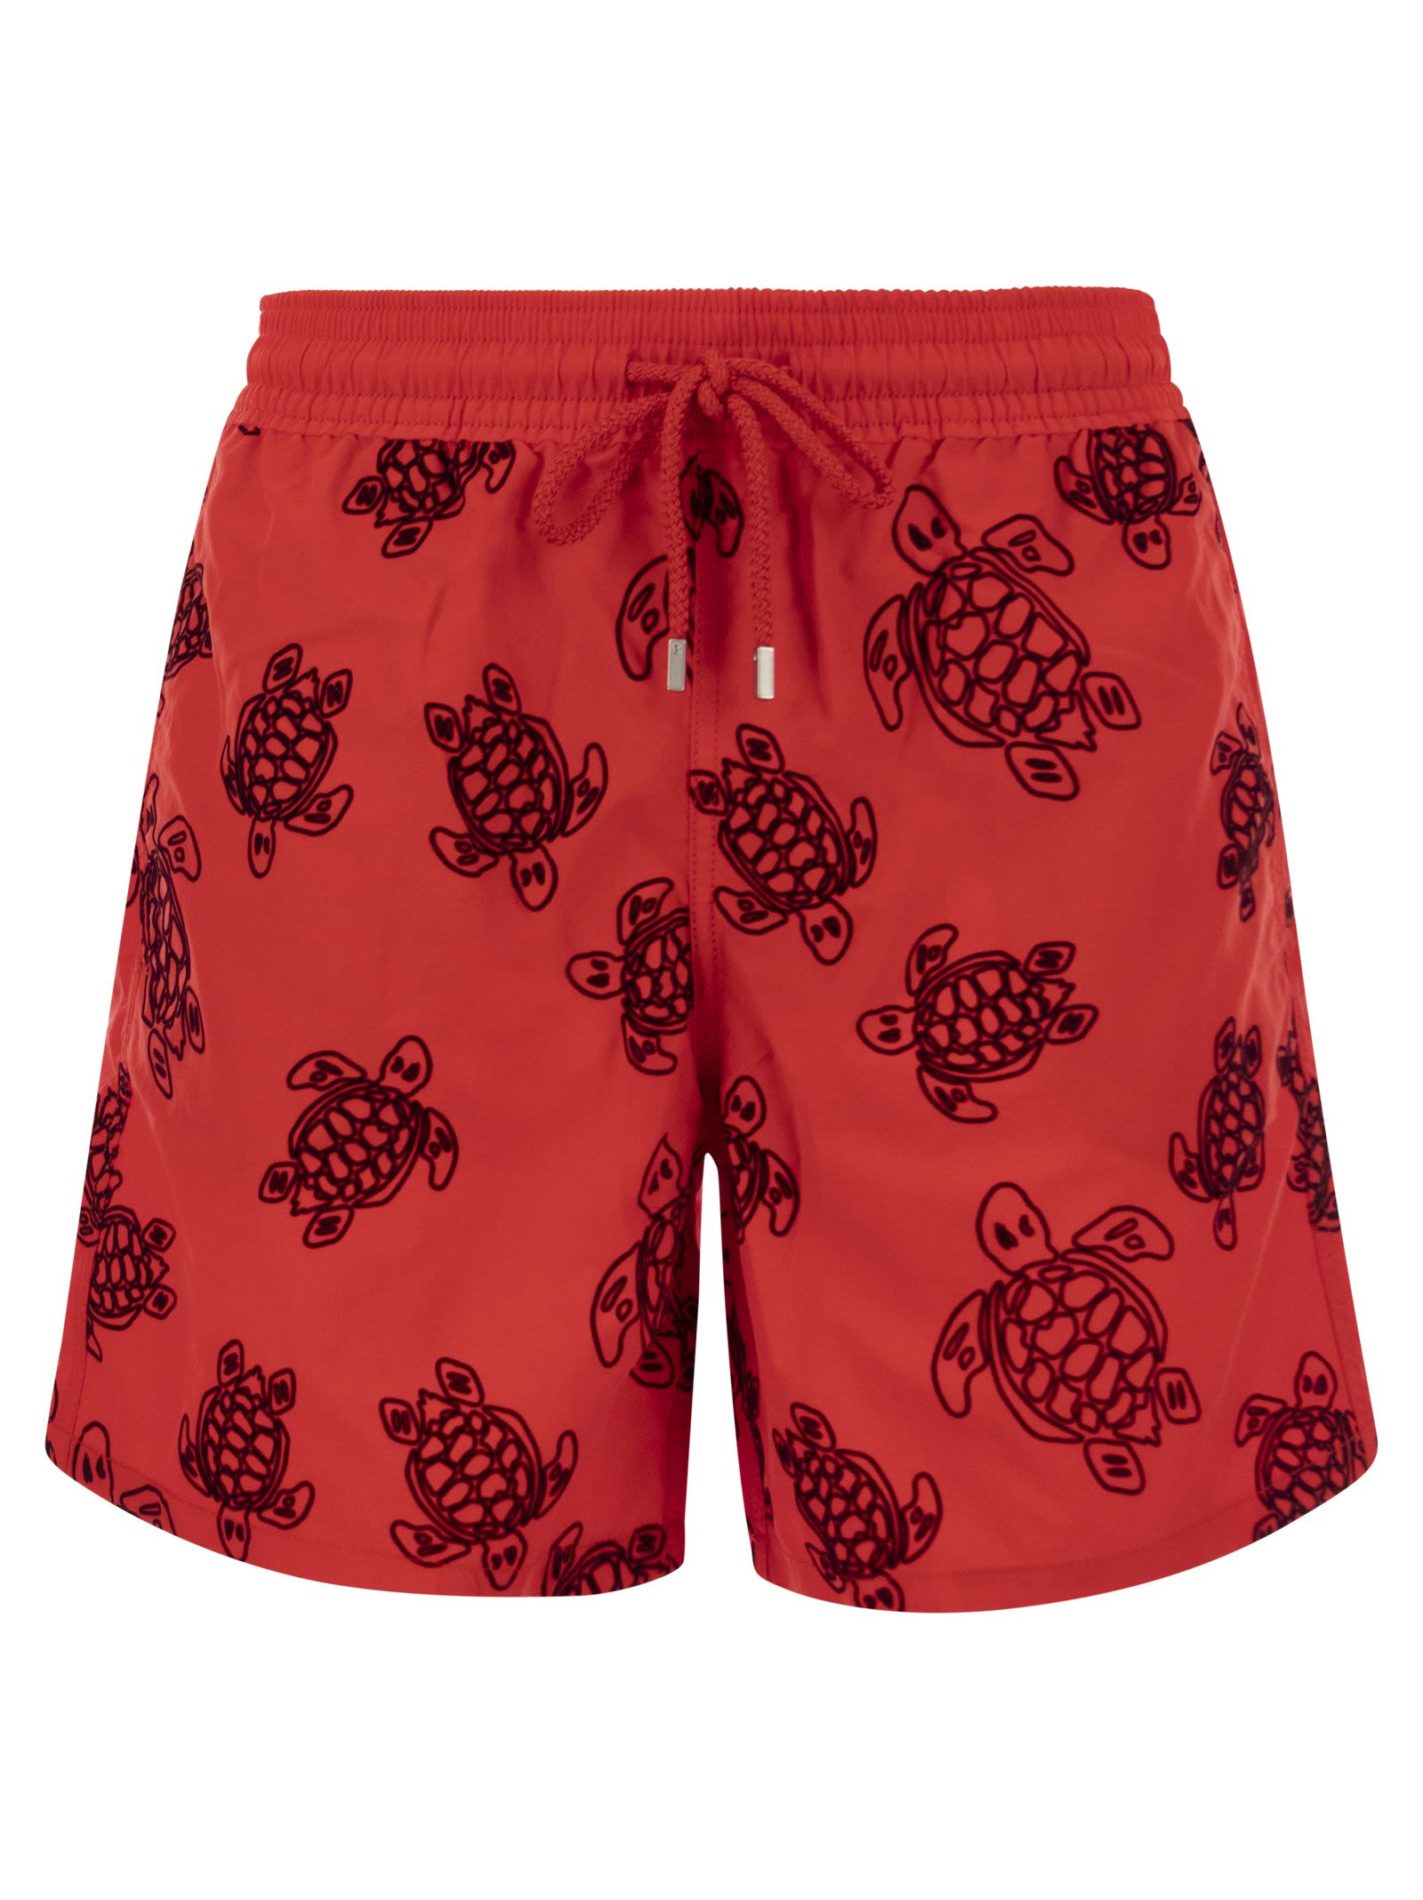 Ronde Des Tortues flocked swimming shorts - Bellettini.com